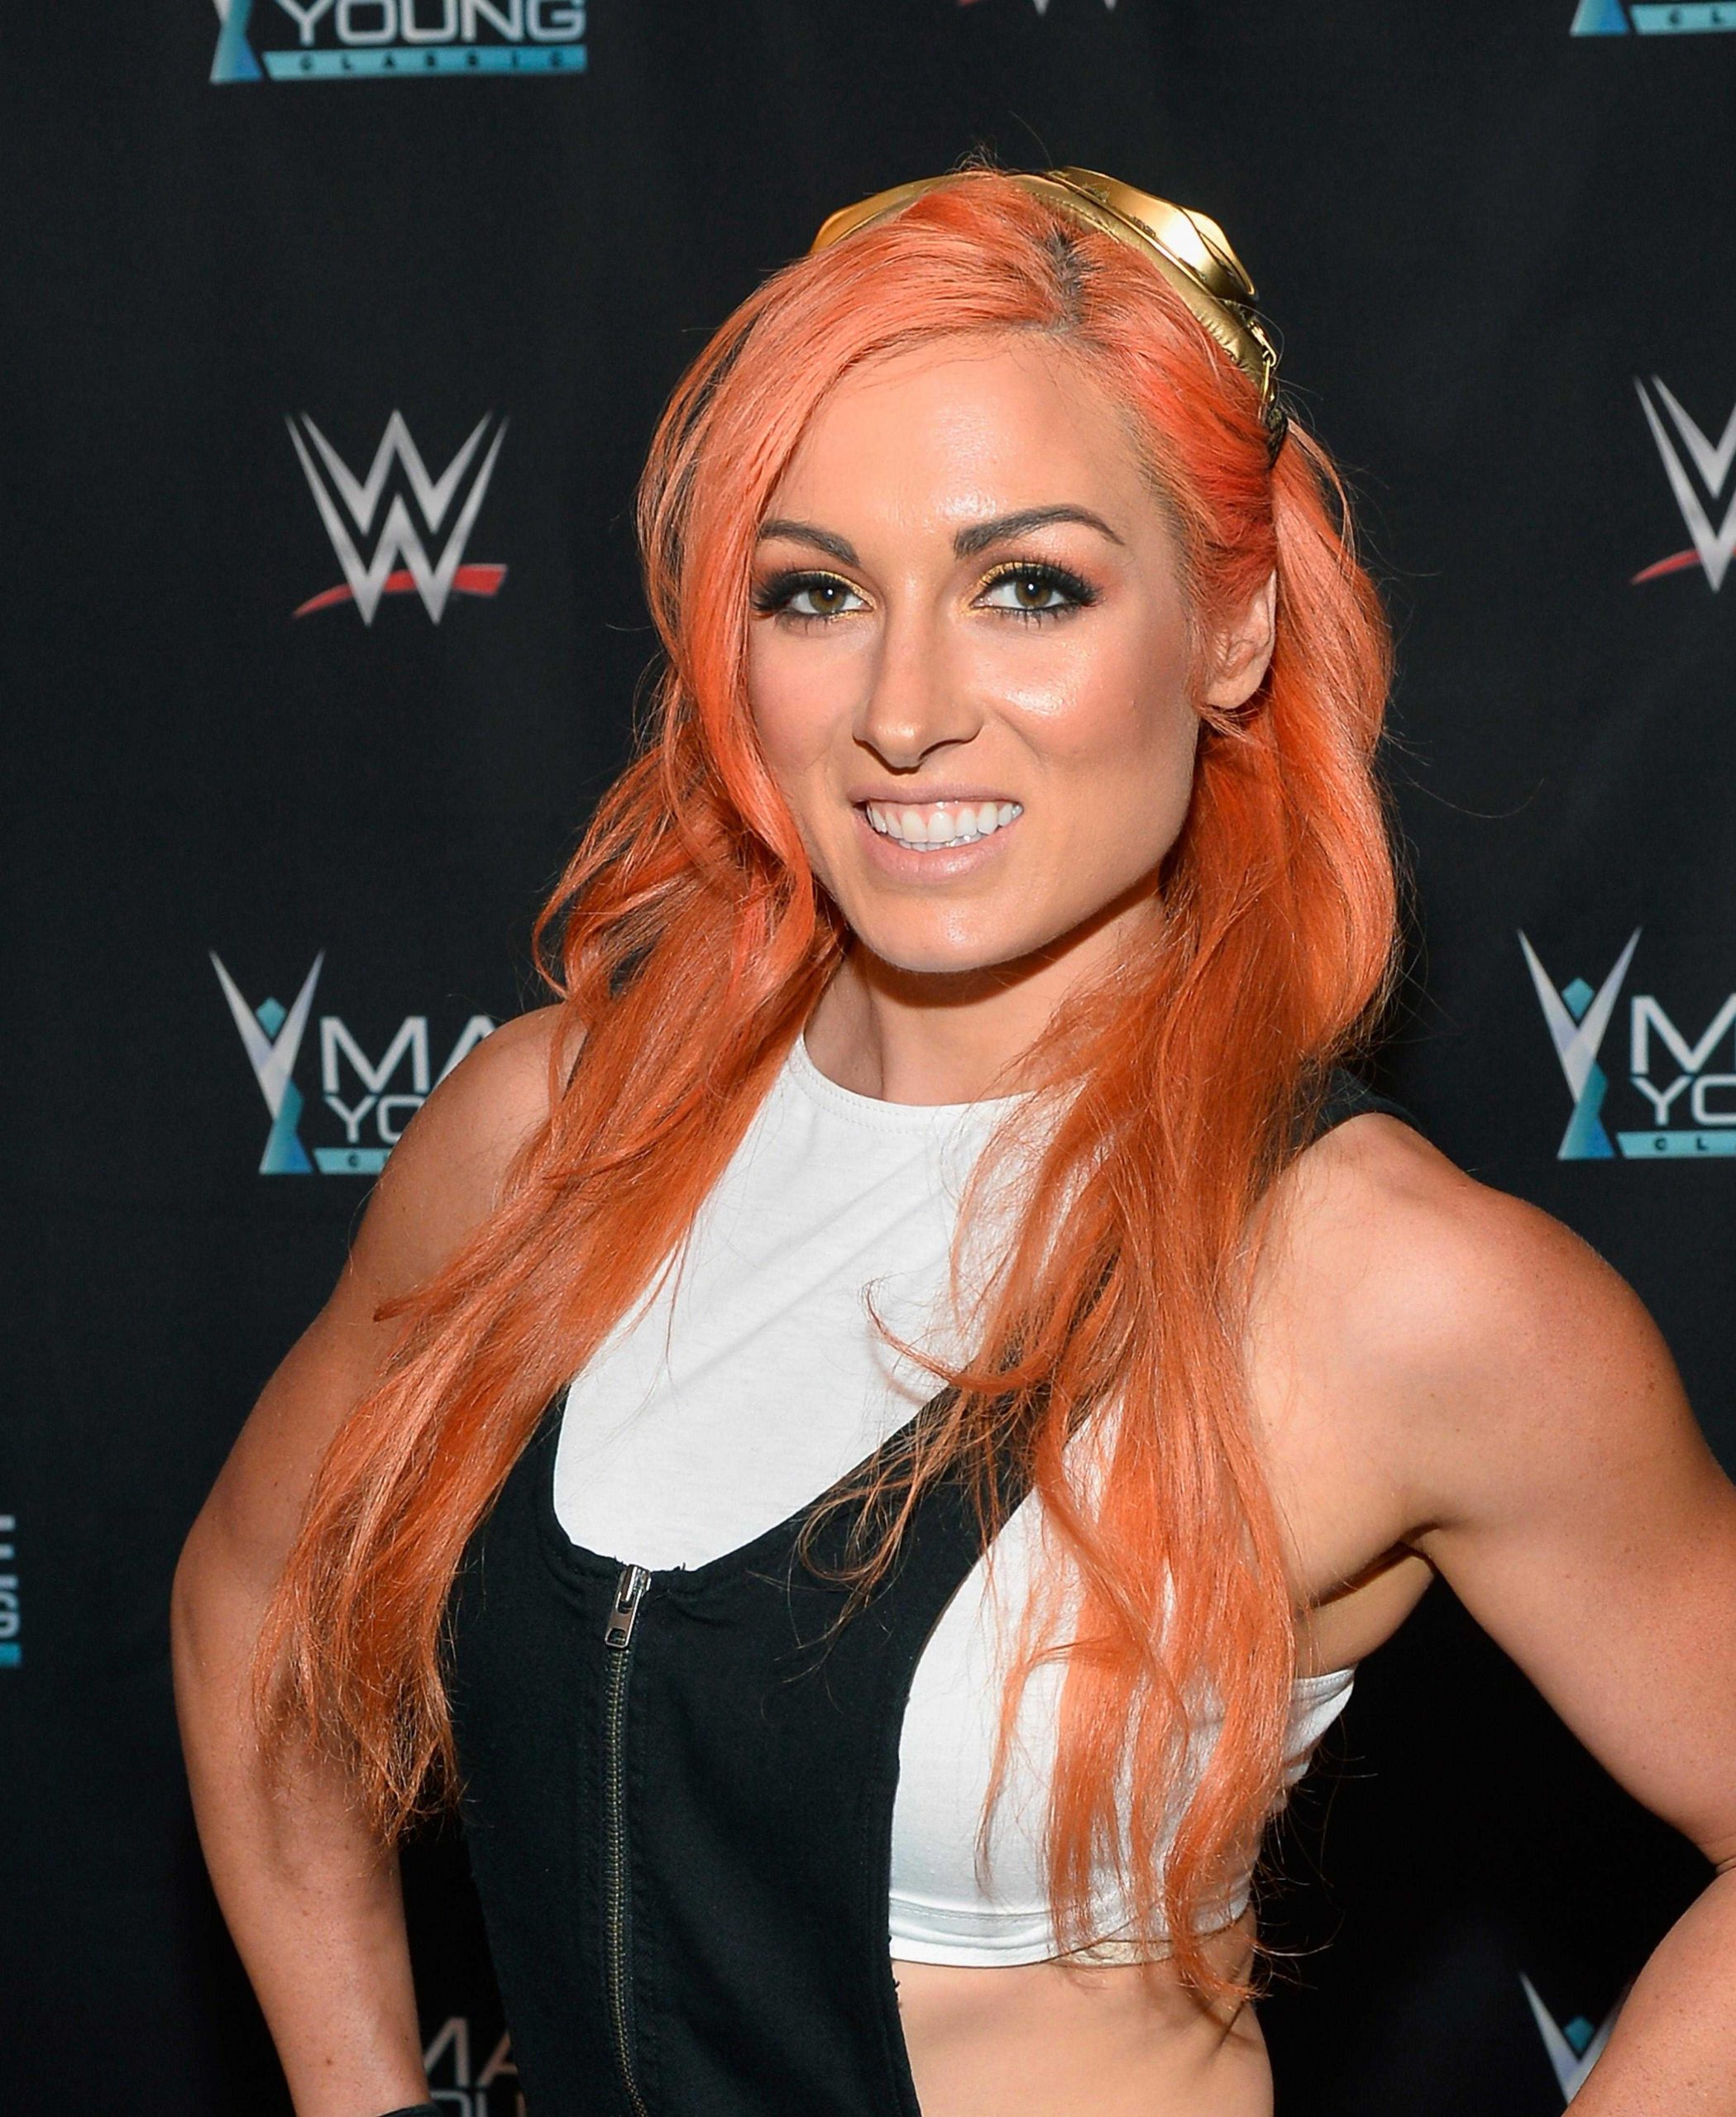 70+ Hot And Sexy Pictures of Becky Lynch – WWE Diva Will Sizzle You Up 50